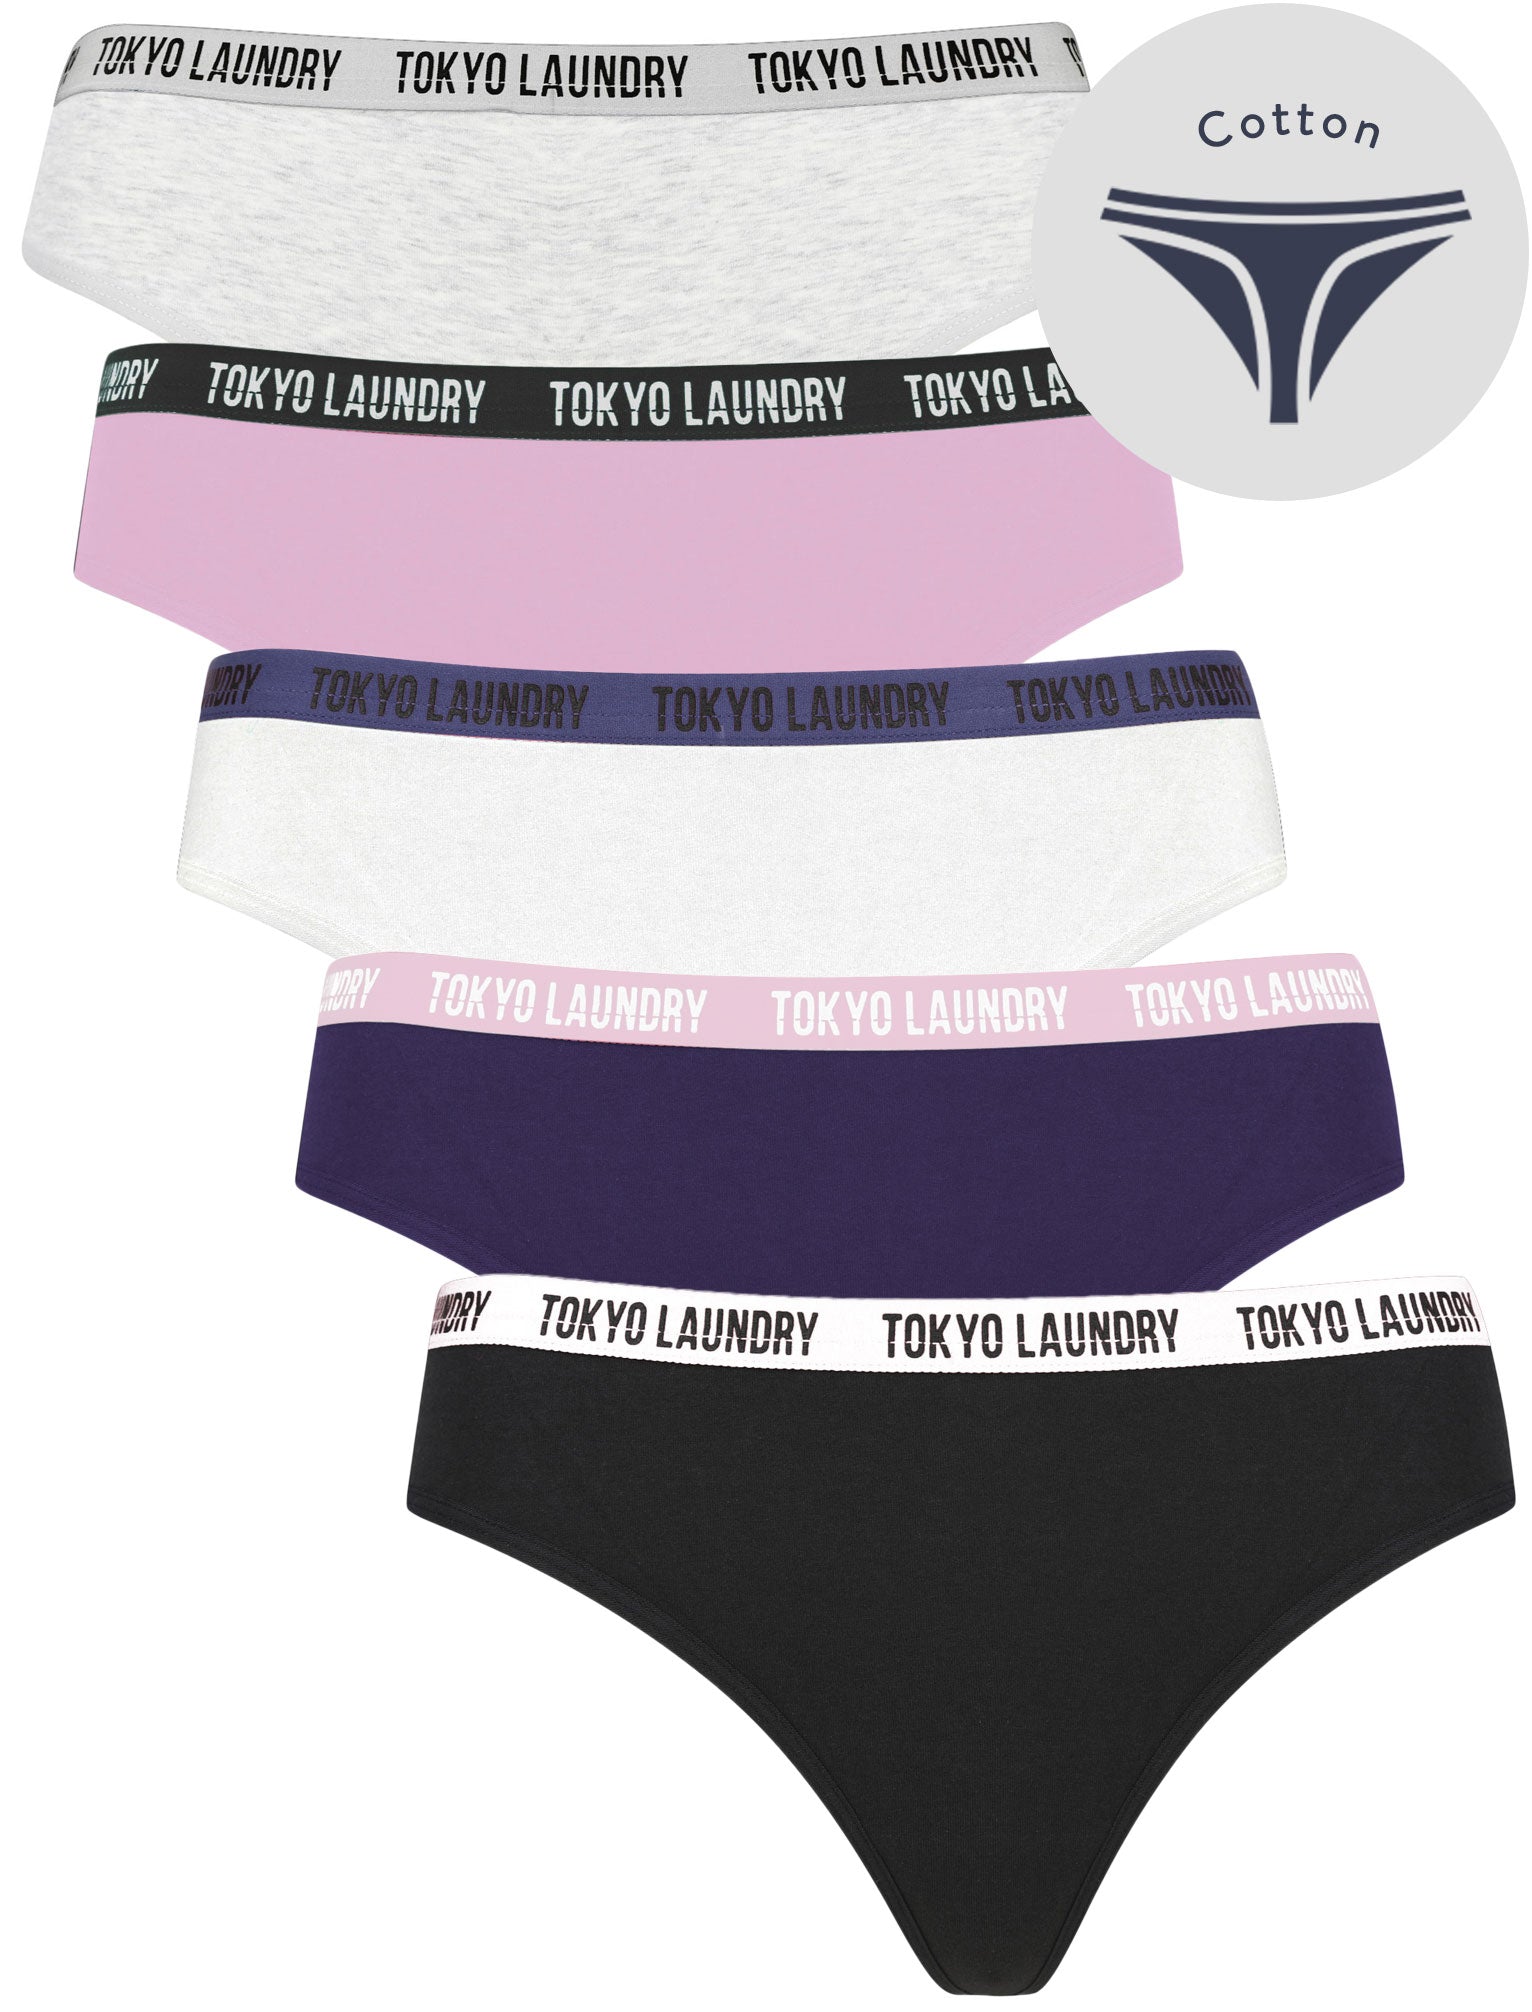 Womens Underwear Ivy (5 Pack) Cotton Assorted Thongs in Light Grey Marl / Winsome Orchid / Bright White / Blue Ribbon / Jet Black - Tokyo Laundry / L - Tokyo Laundry